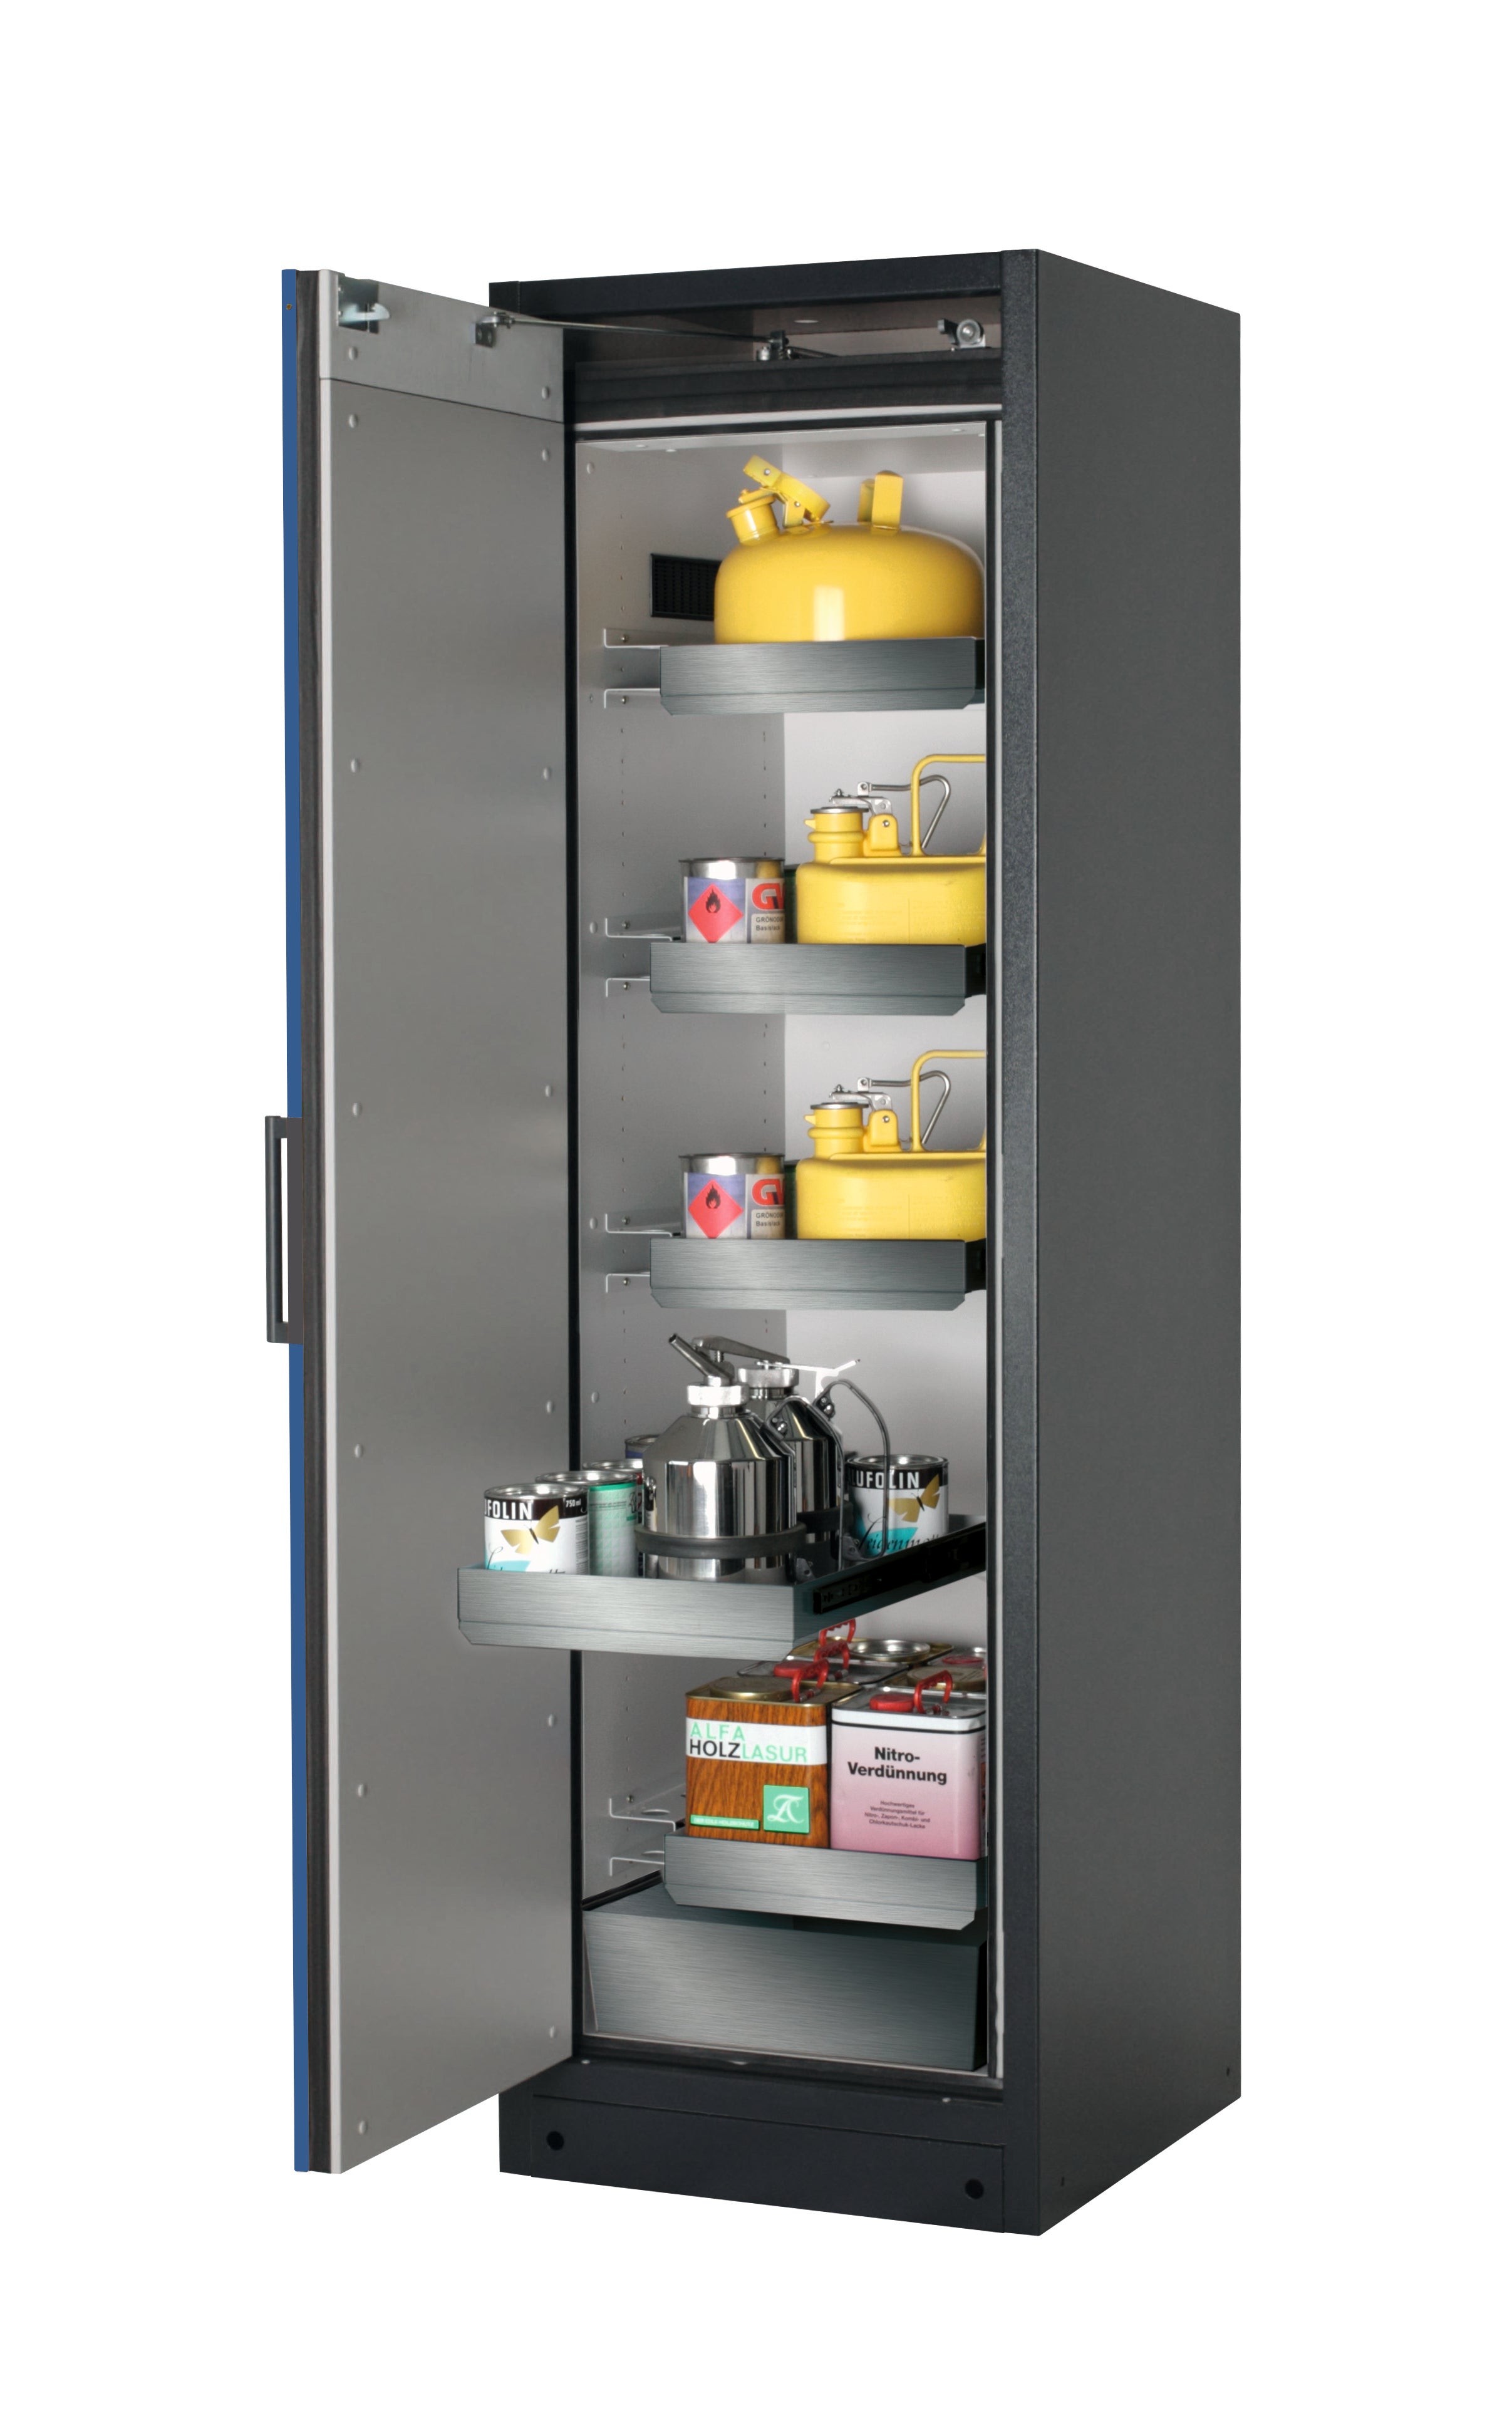 Type 90 safety storage cabinet Q-PEGASUS-90 model Q90.195.060.WDAC in gentian blue RAL 5010 with 4x drawer (standard) (stainless steel 1.4301),